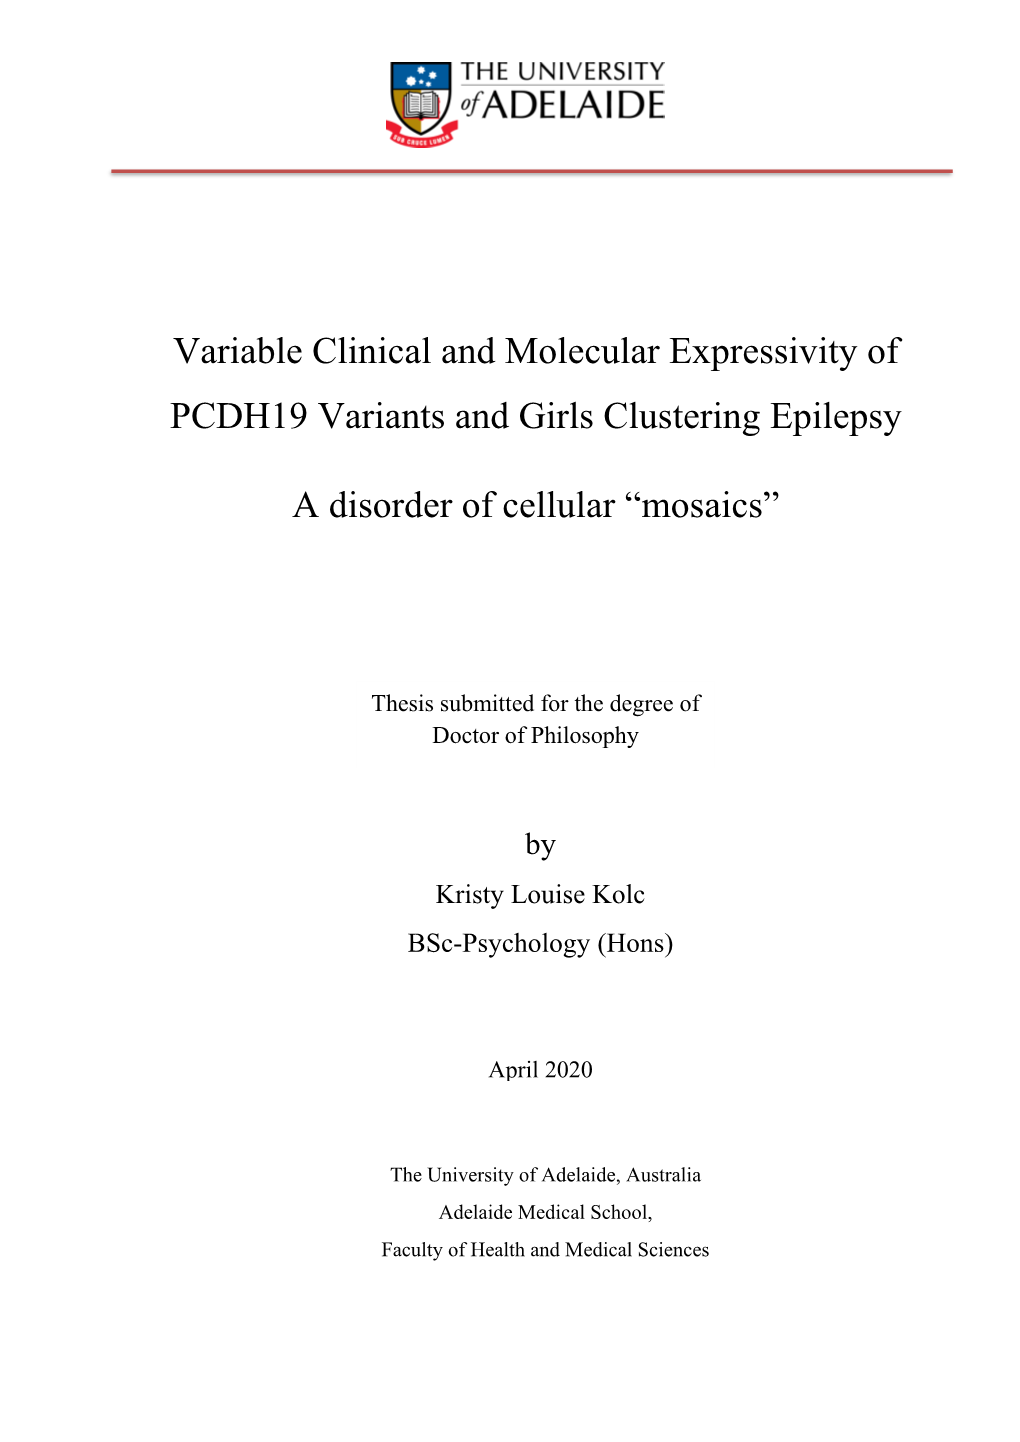 Variable Clinical and Molecular Expressivity of PCDH19 Variants and Girls Clustering Epilepsy